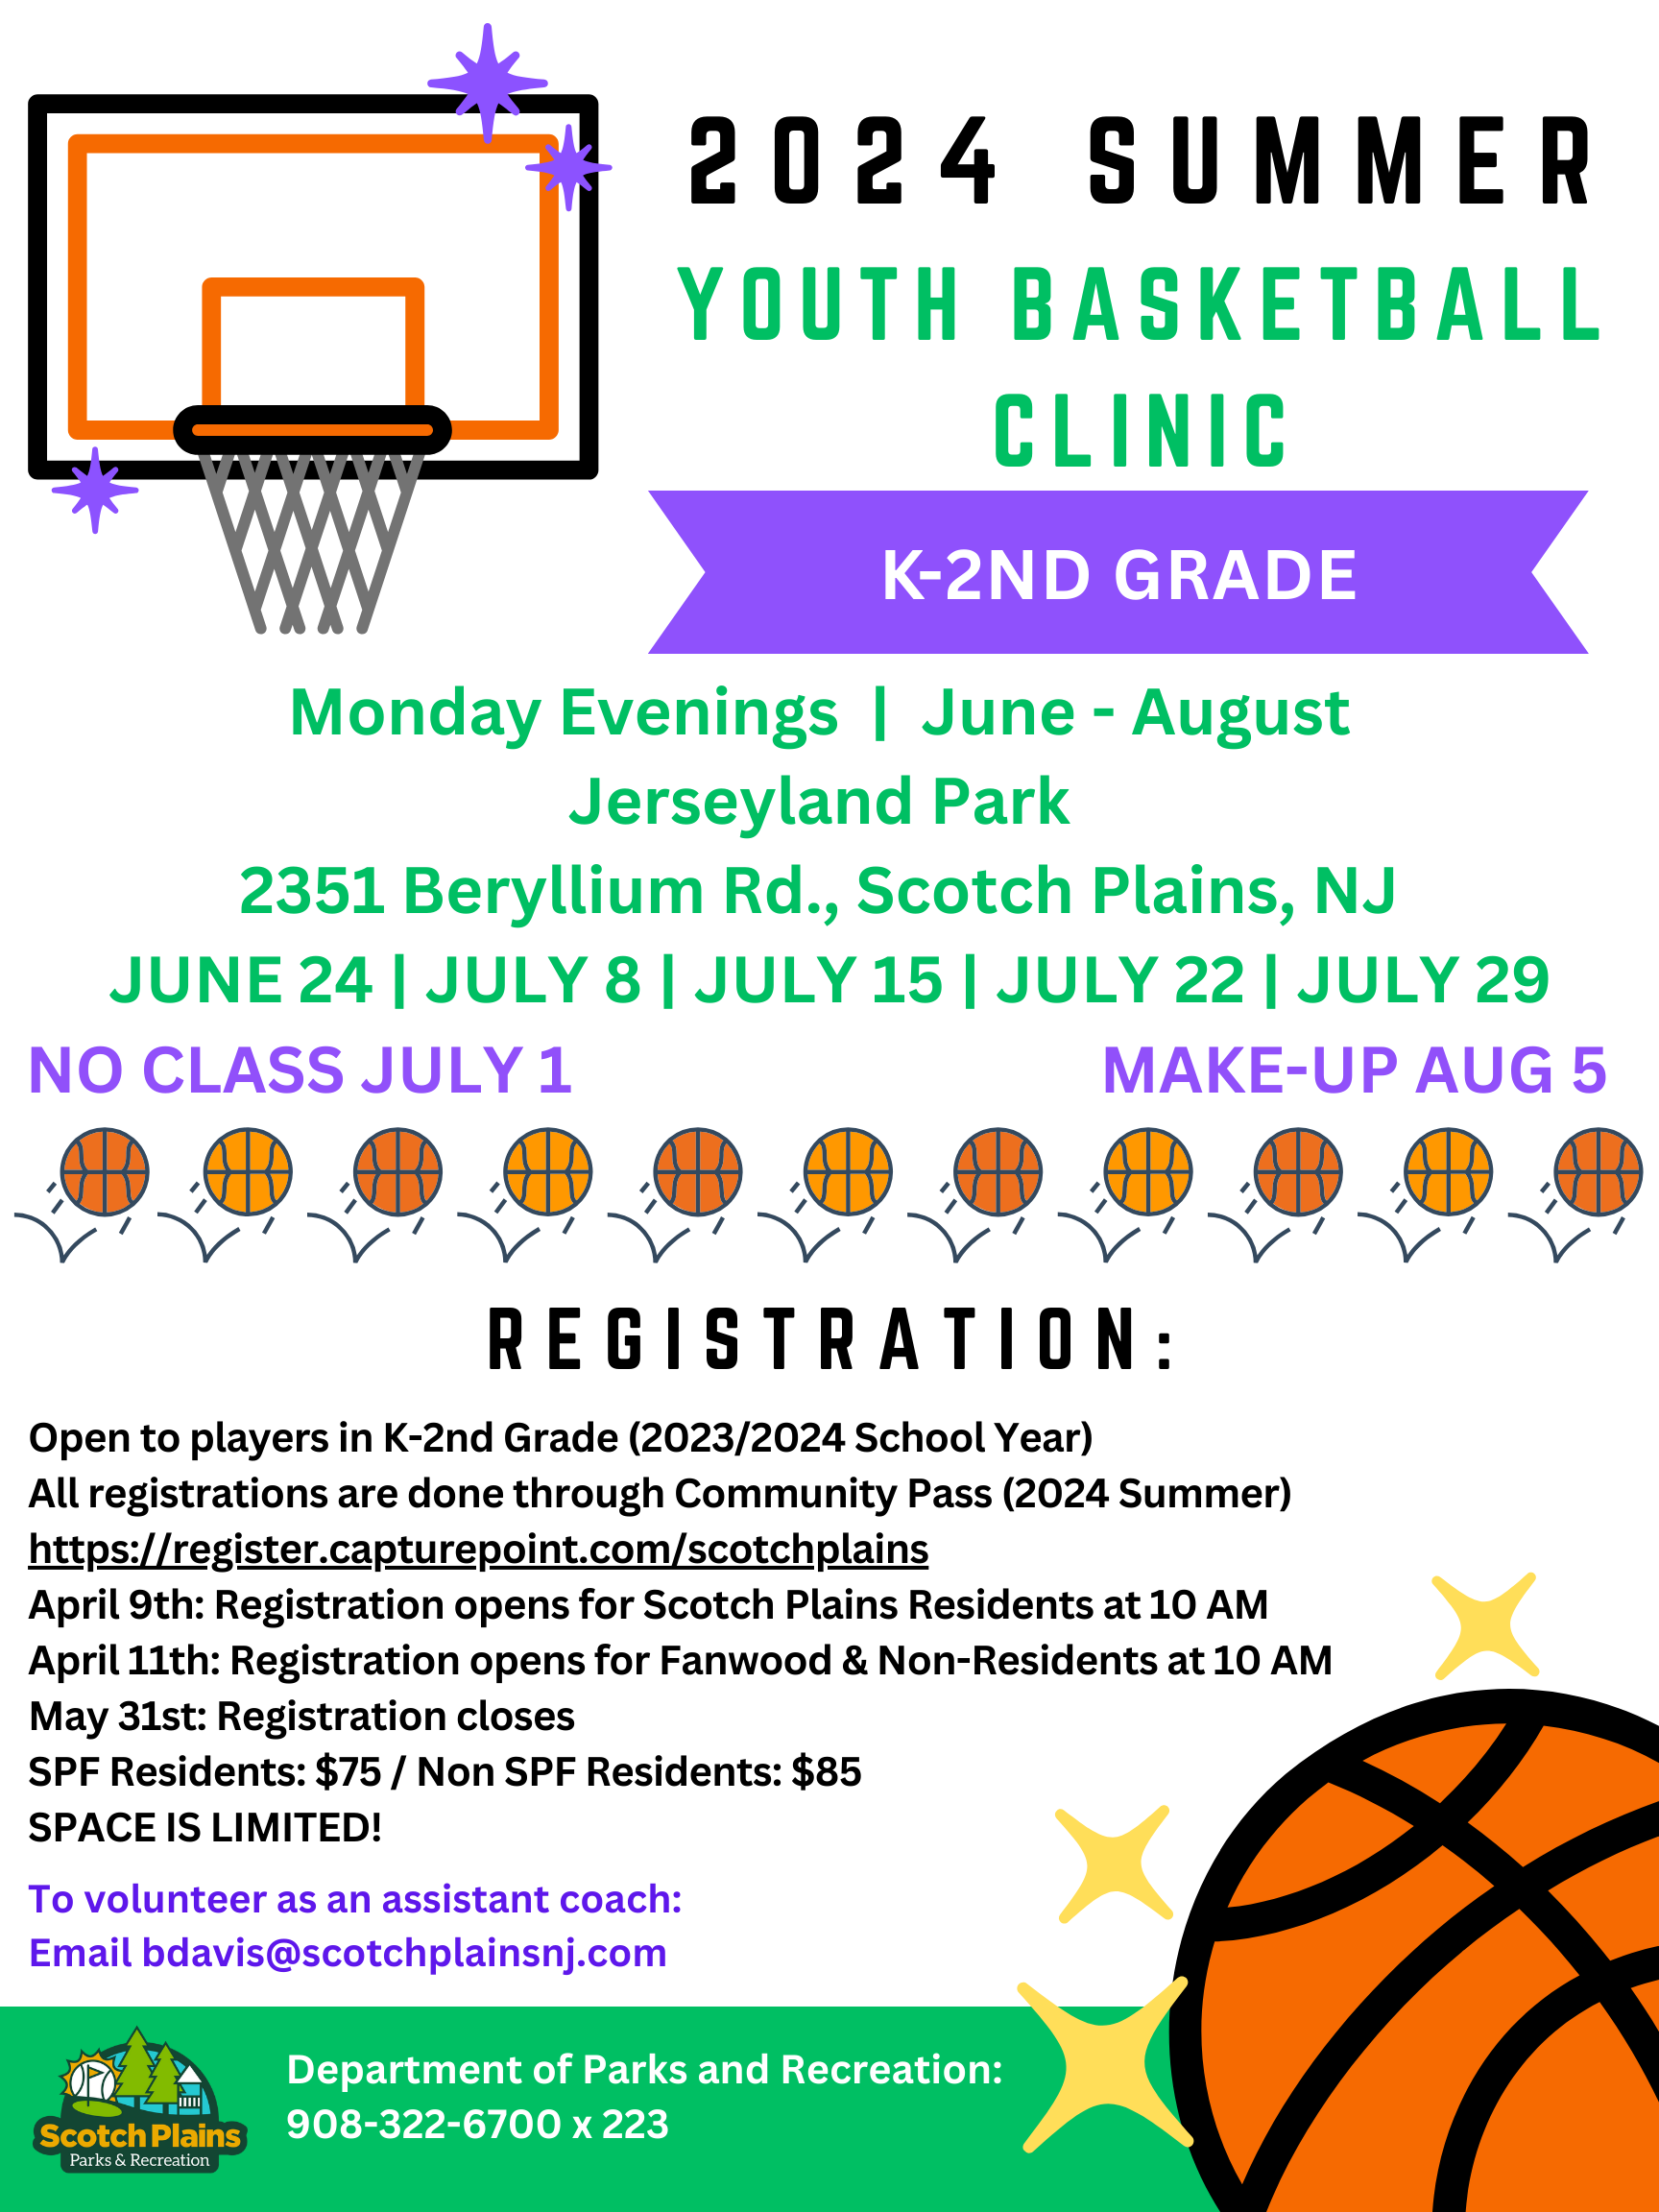 2024 Summer YOUTH BASKETBALL CLINIC 3